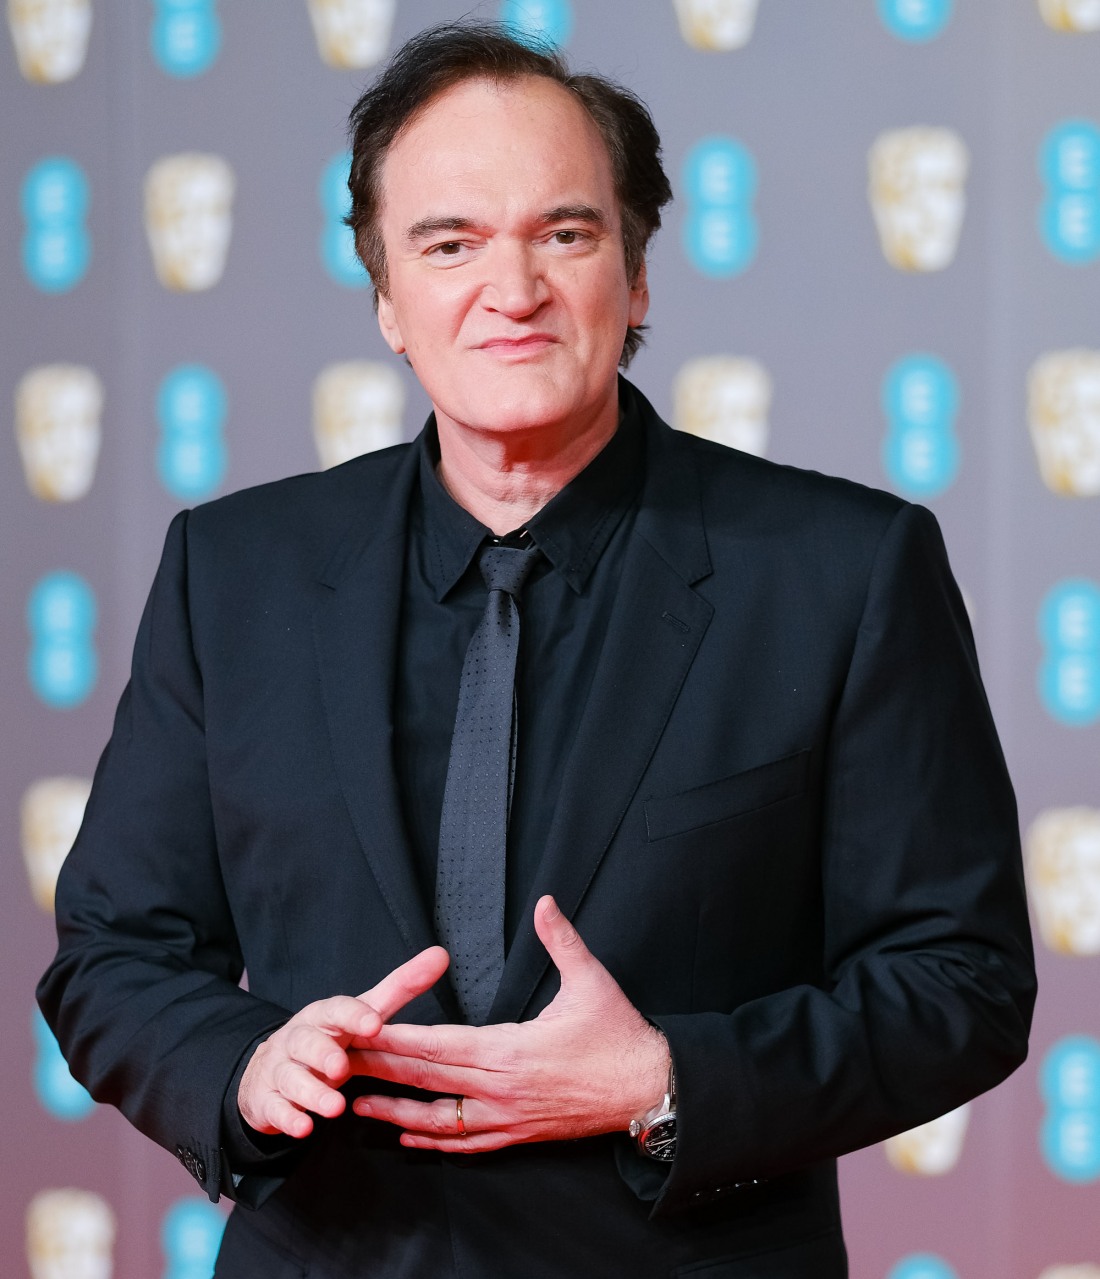 Quentin Tarantino attends the 2020 EE British Academy Film Awards on Sunday 2 February 2020